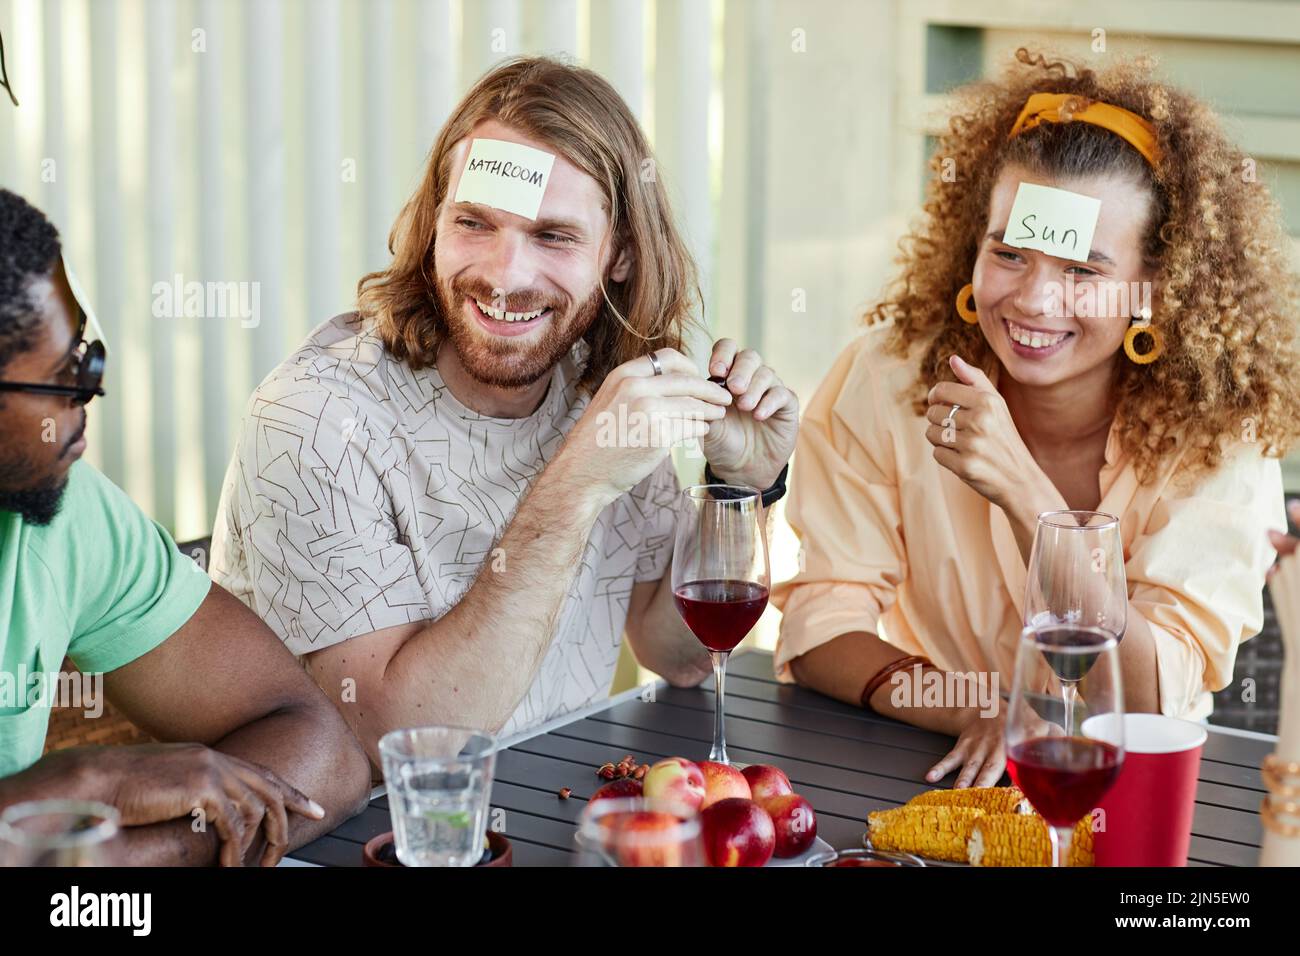 Portrait of smiling man with sticker note on head playing Guess who game with group of friends at outdoor party Stock Photo